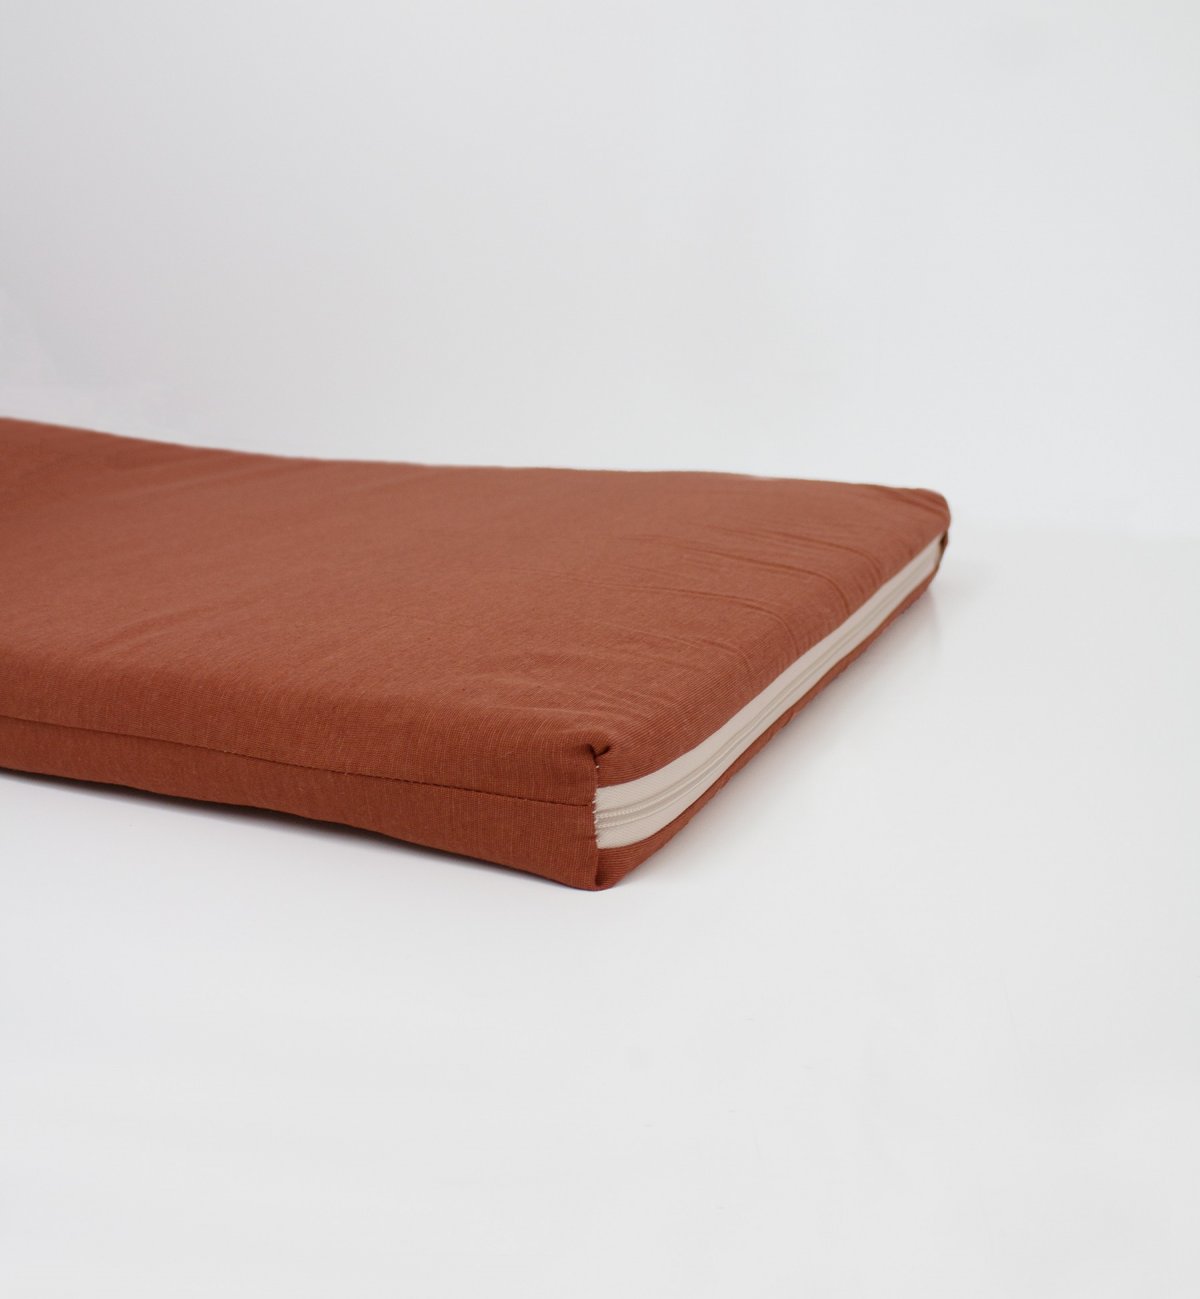 Kadolis rolled baby travel mattress with removable covers